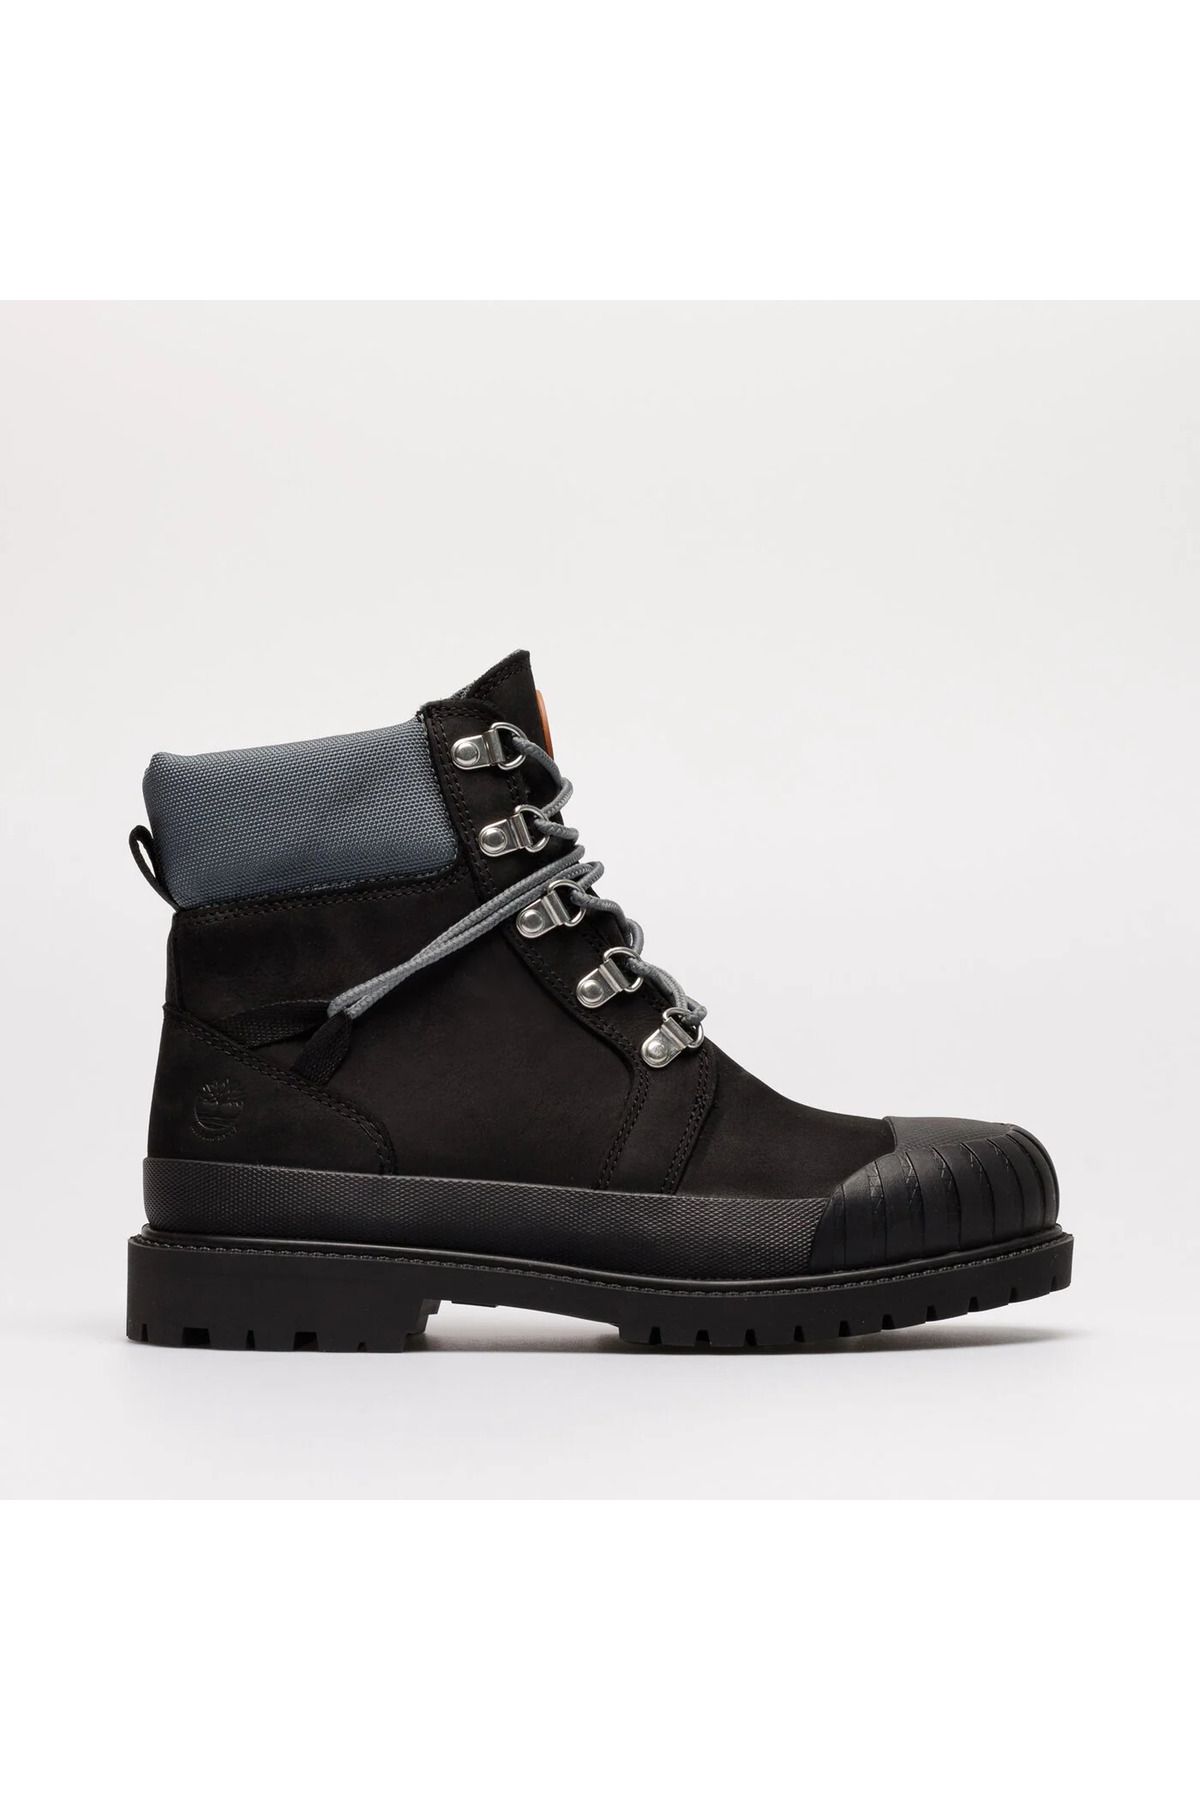 Timberland Heritage 6in Rubber Toe WP